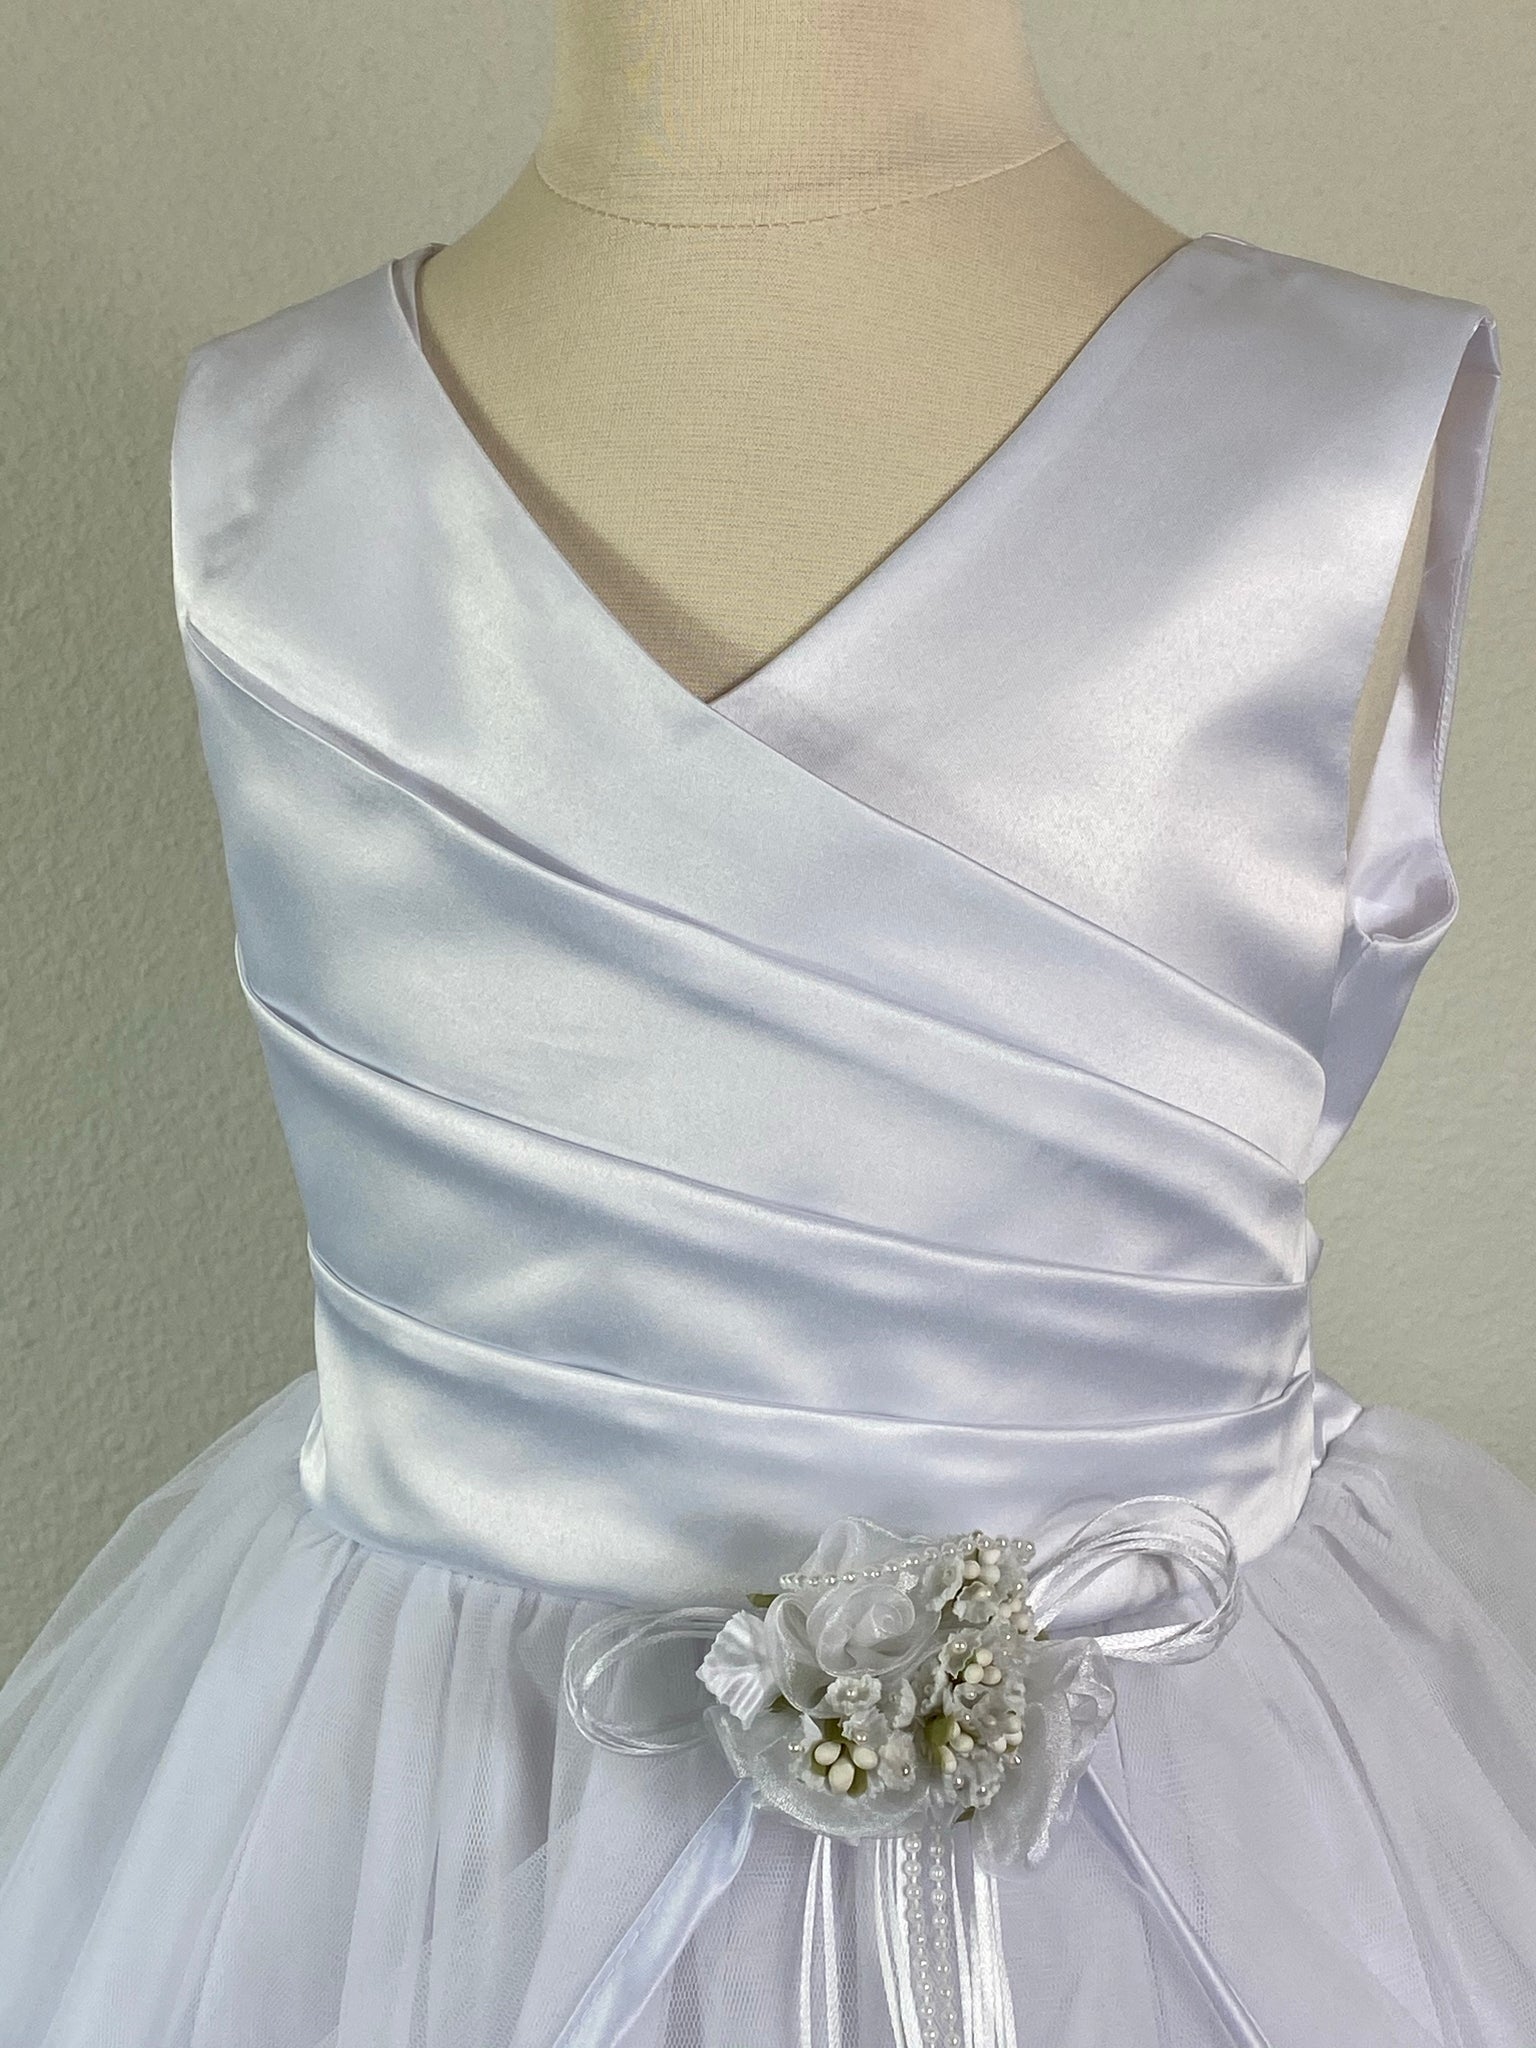 White, size 10 Wrapped Ribbed Bodice Small floral bouquet detailing on lower bodice Gathered mesh cape skirt lined in satin Zipper Closure Satin Ribbon for bow